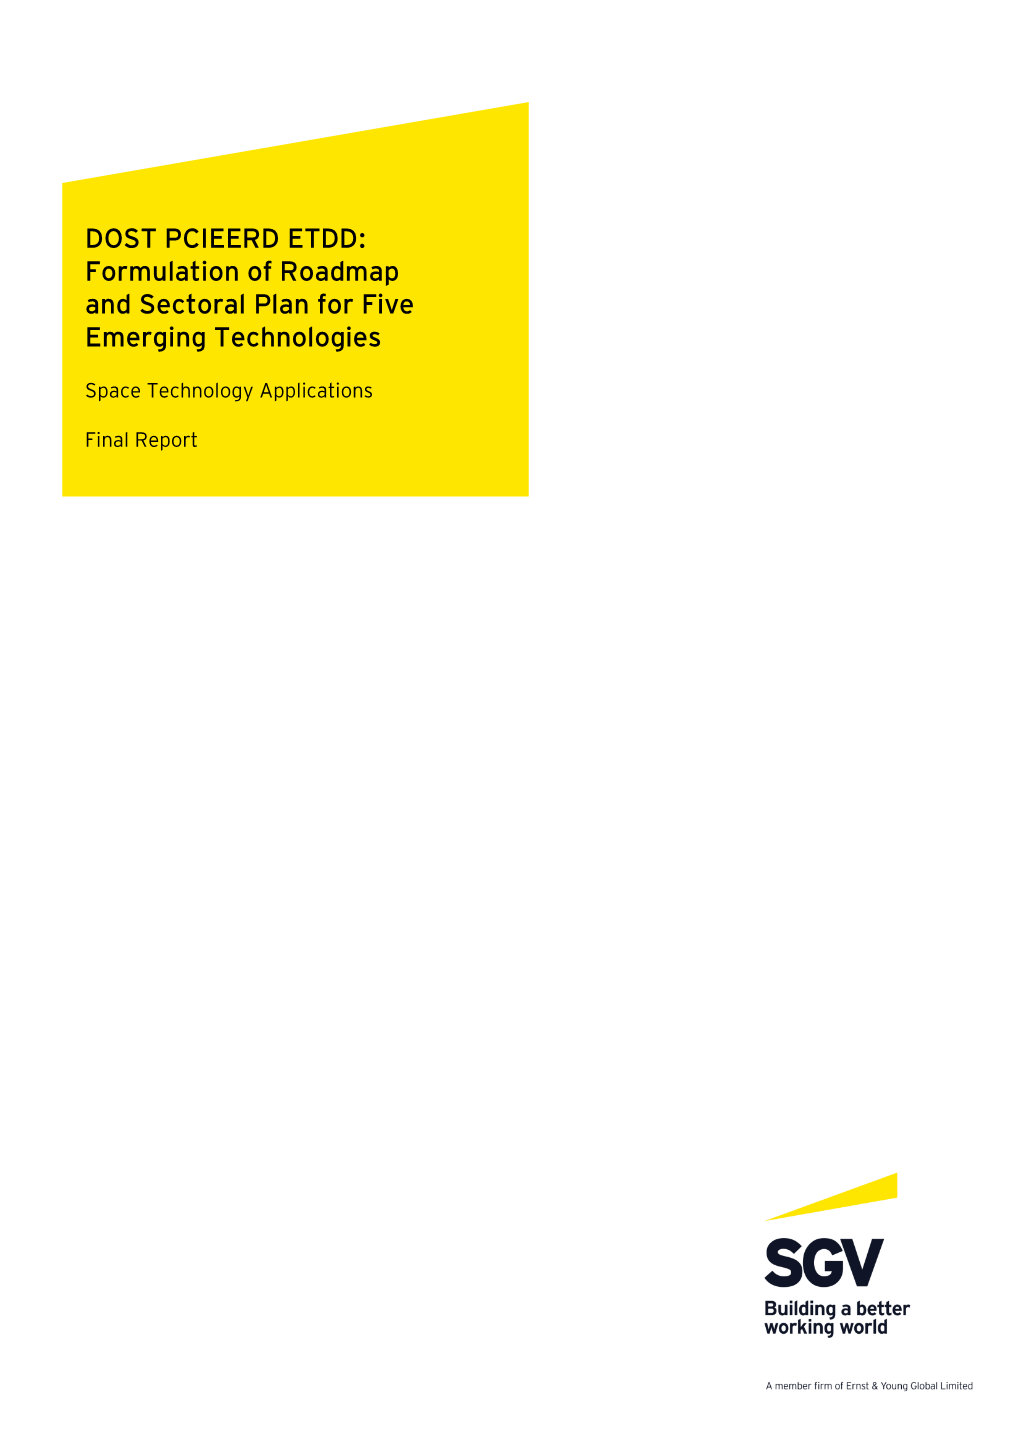 DOST PCIEERD ETDD: Formulation of Roadmap and Sectoral Plan for Five Emerging Technologies